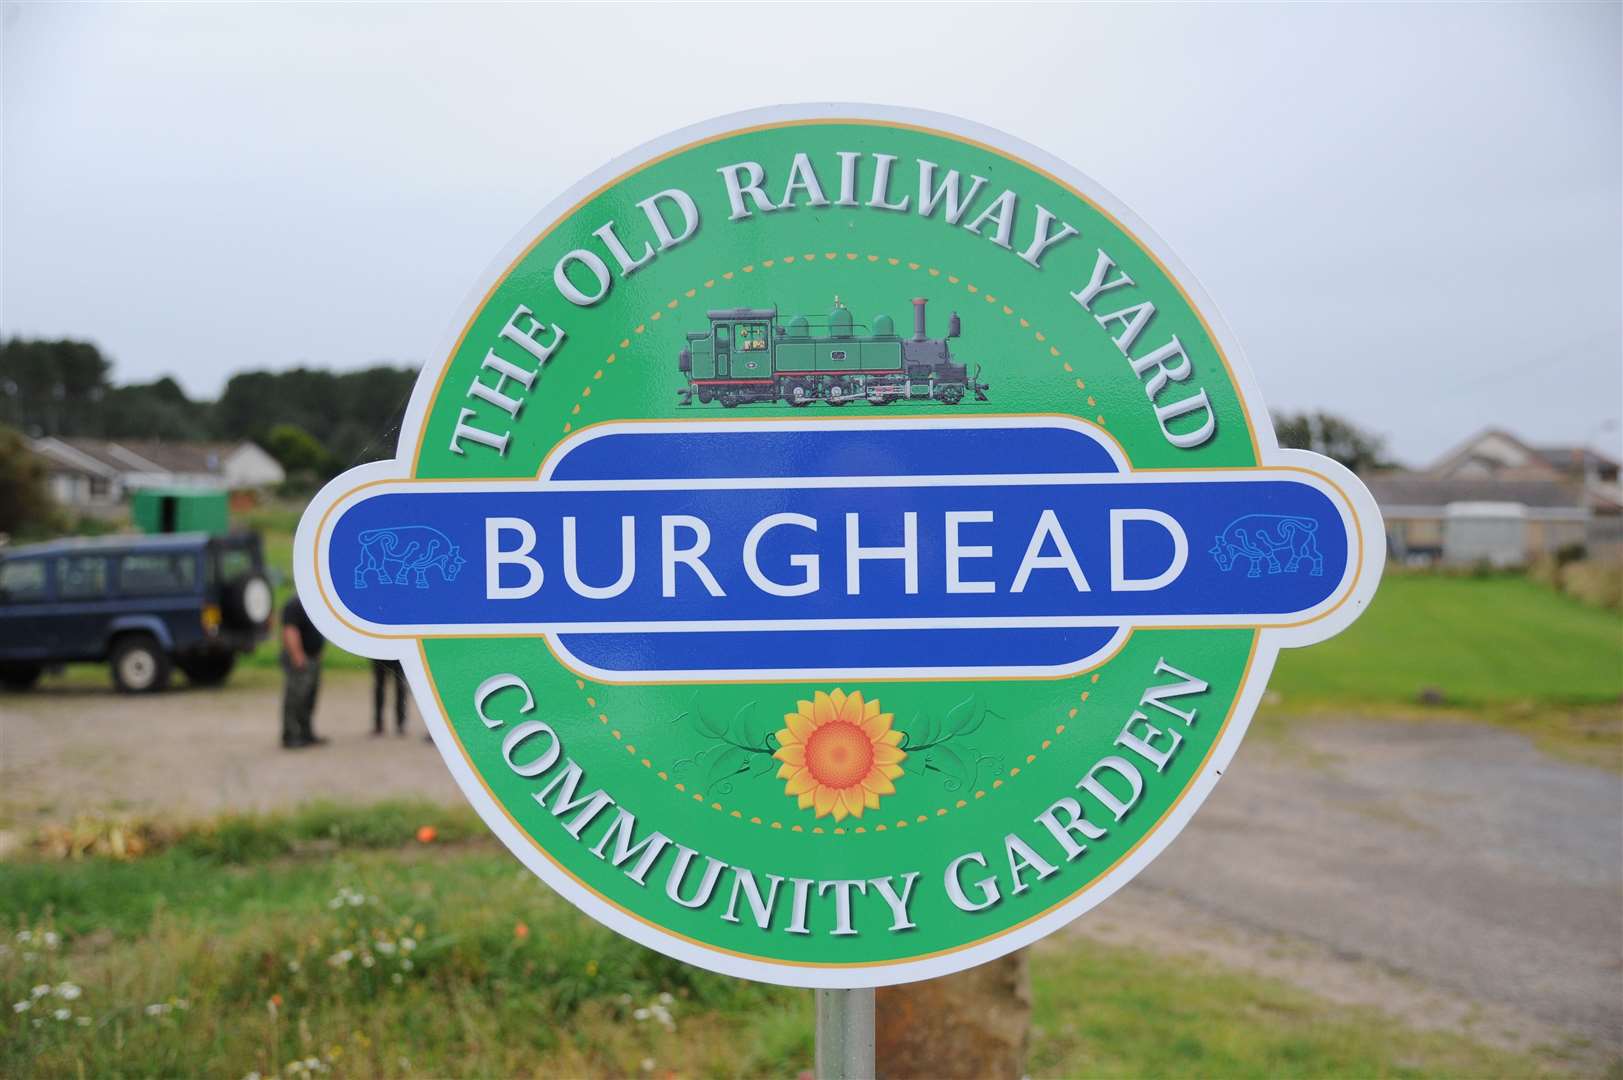 Burghead Community Garden will be filled with activities when a Fun Day plays out this Saturday.